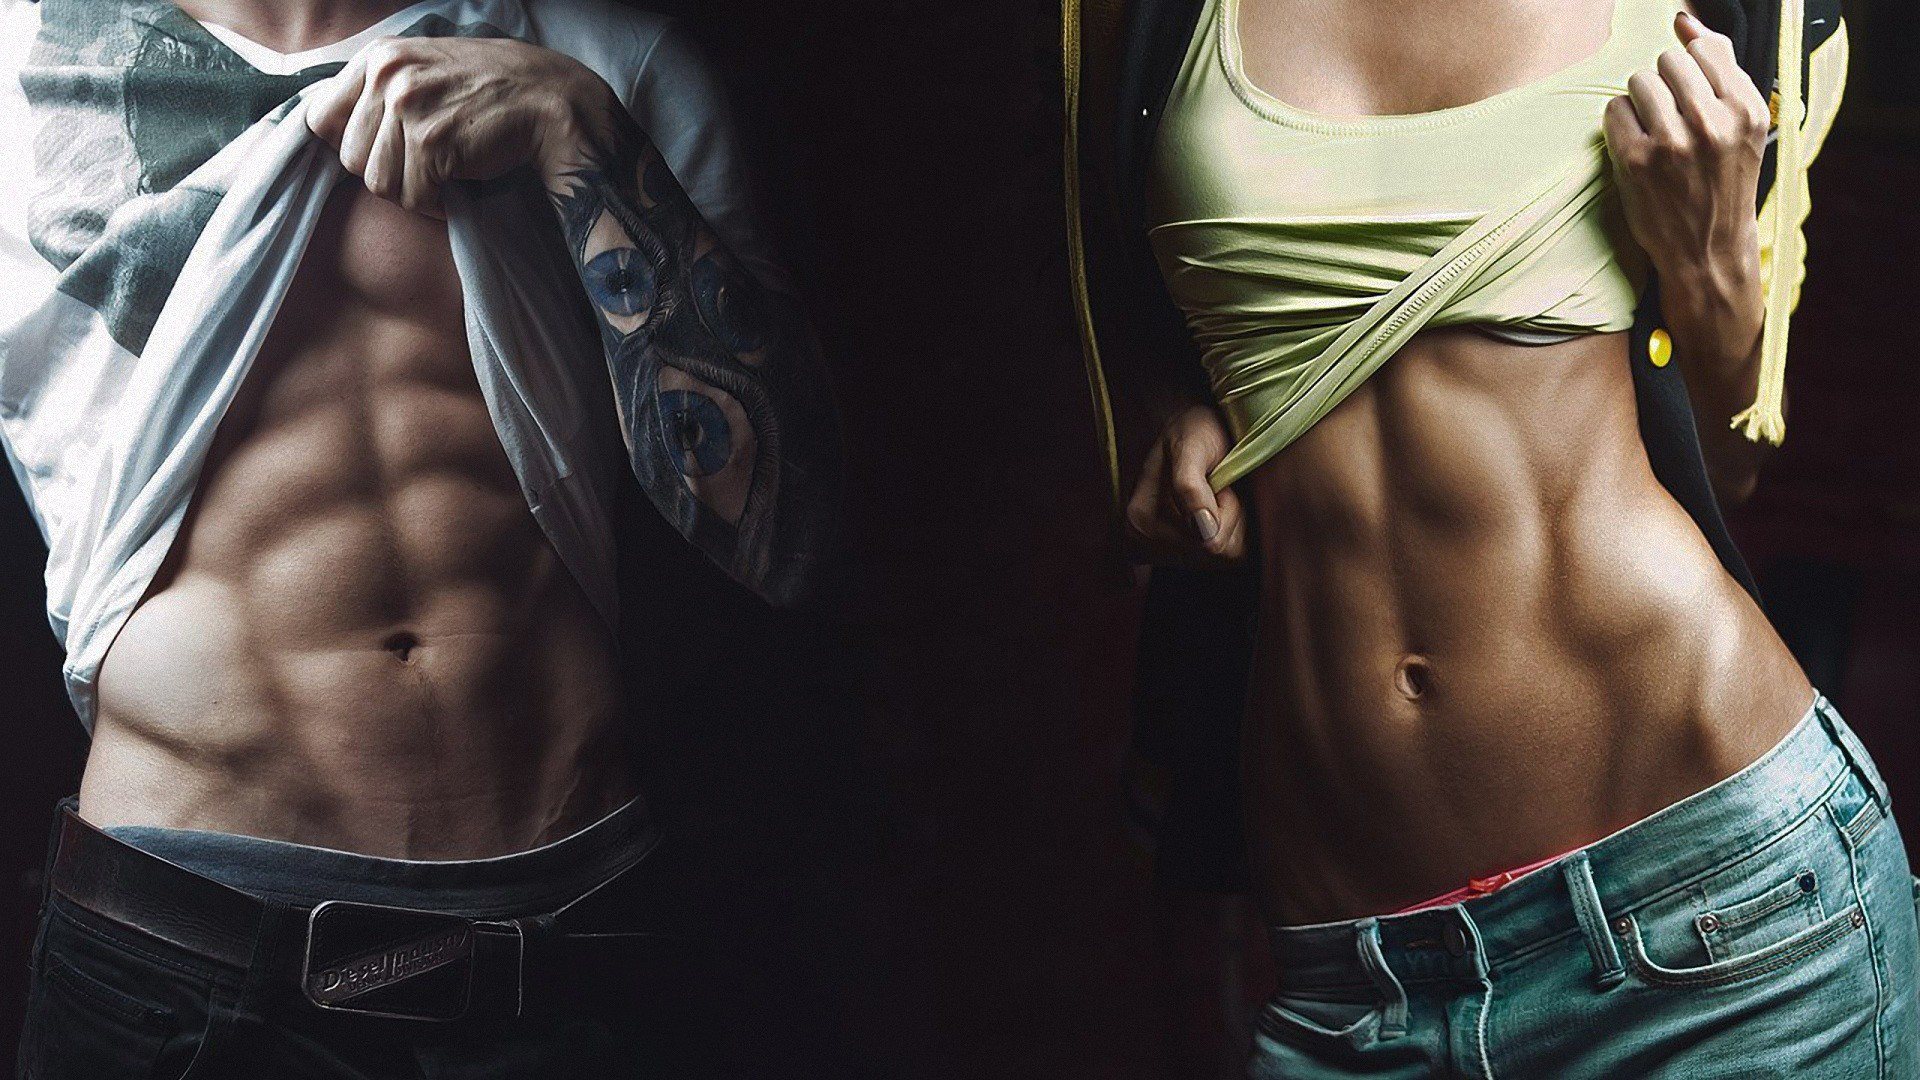 Girl and Boy, Abs Muscular